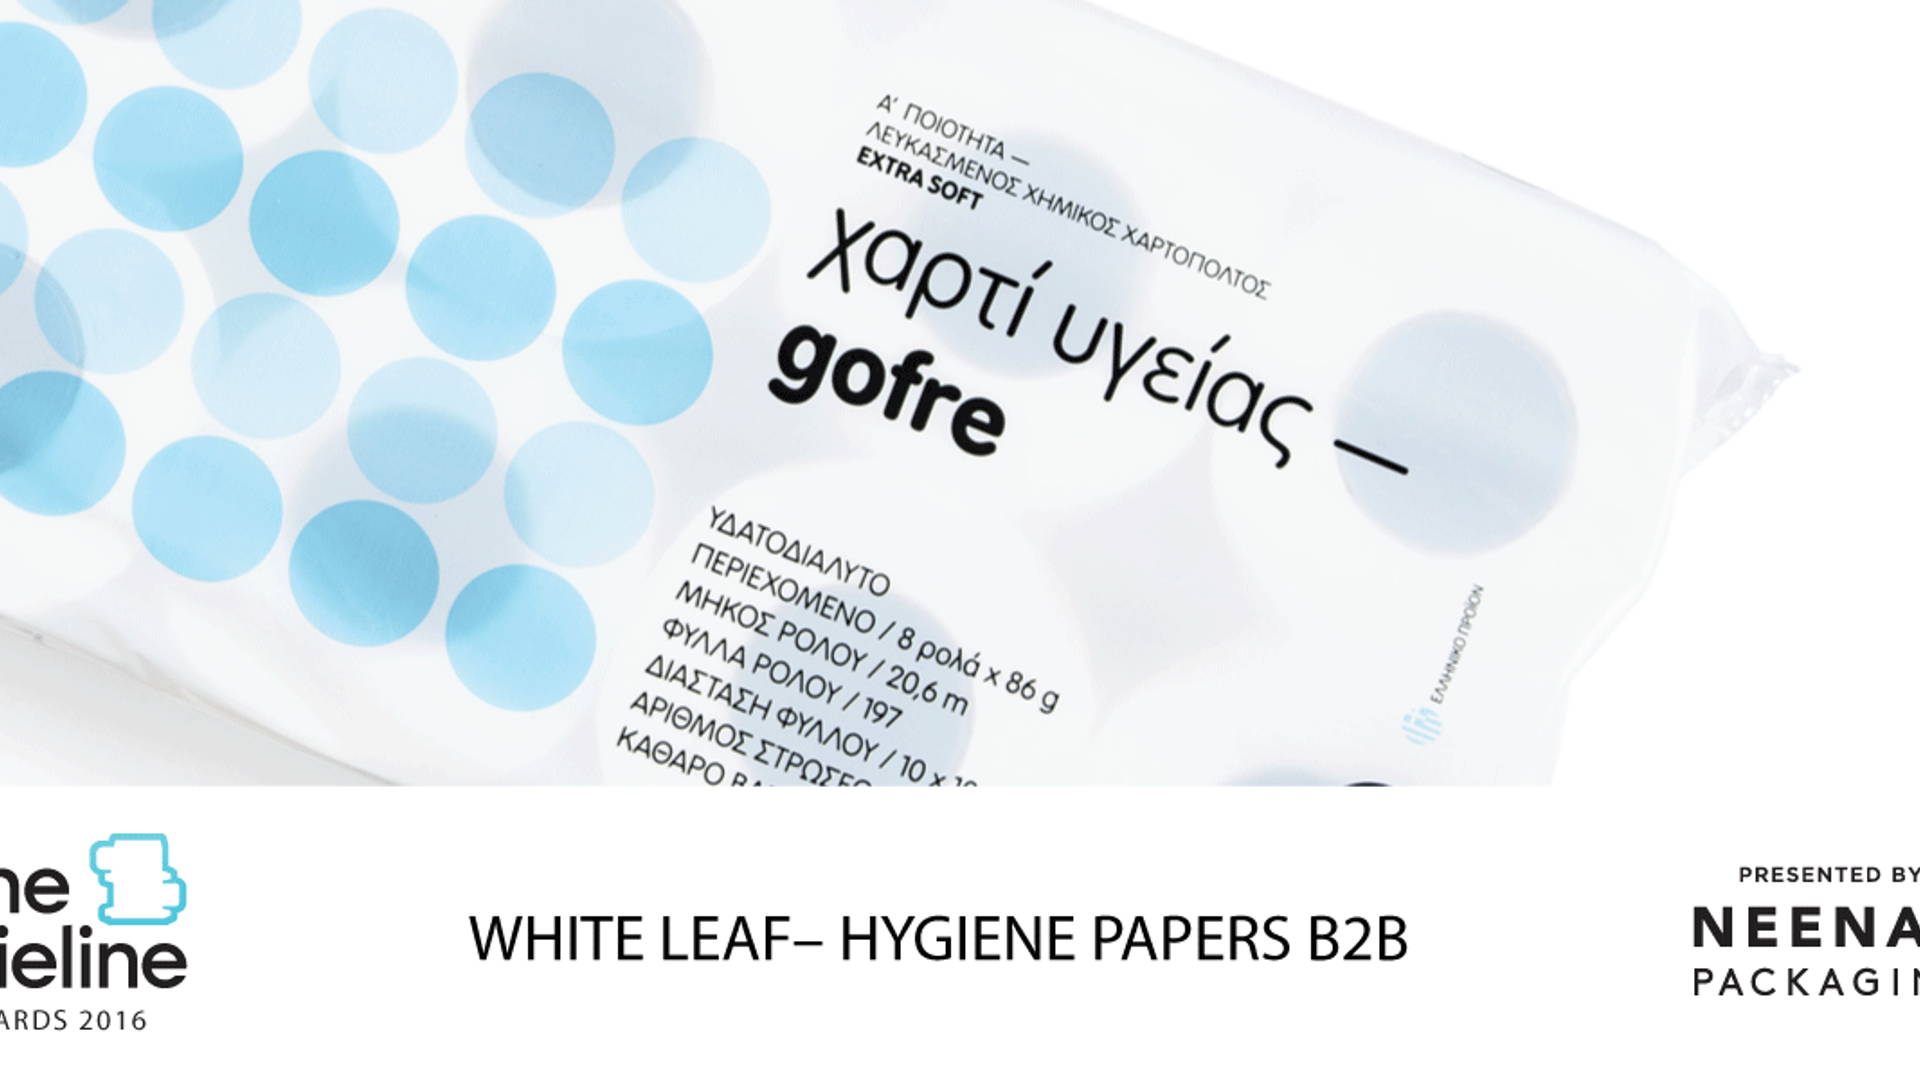 Featured image for The Dieline Awards 2016 Outstanding Achievements: White leaf — hygiene papers b2b